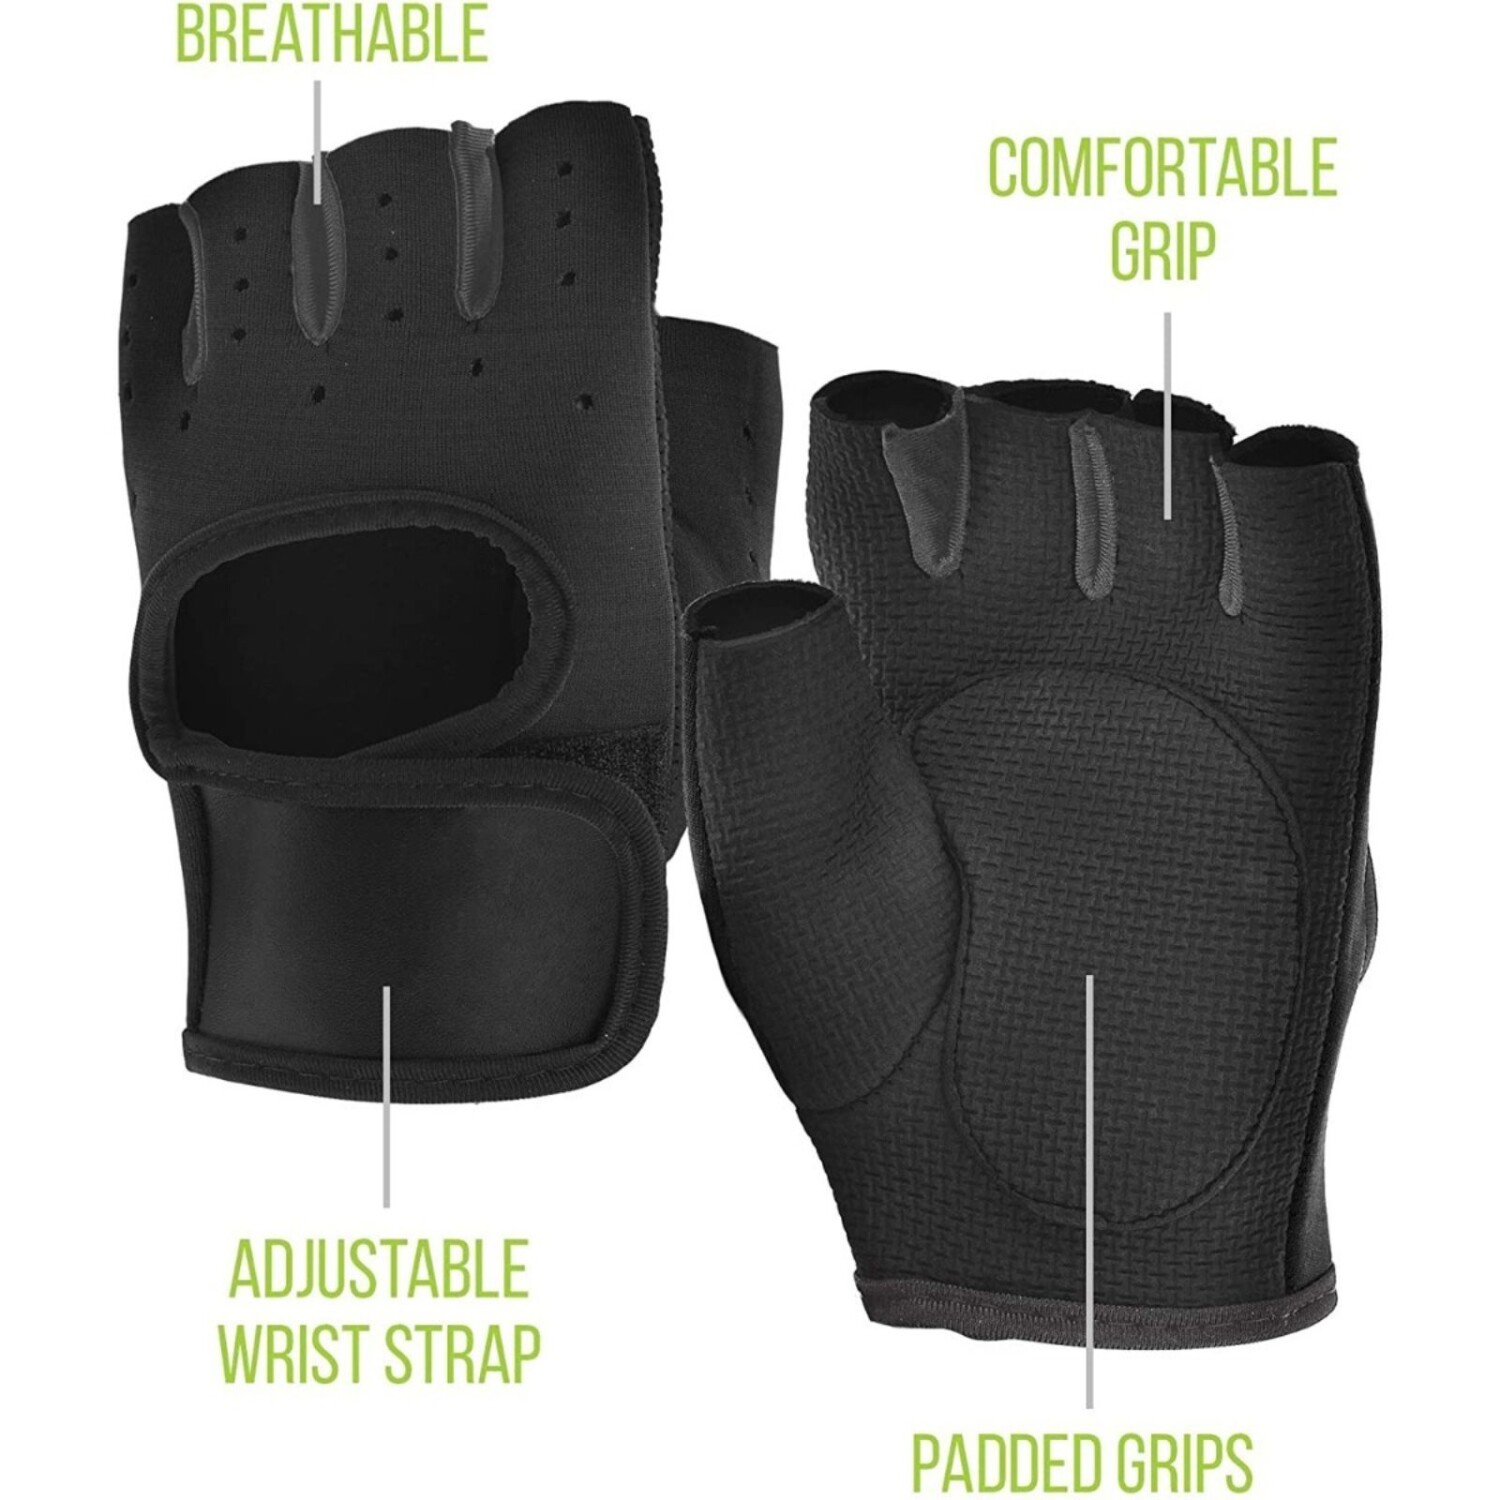 Guantes Fitness Crossfit Gym Gimnasio Musculacion Microperf